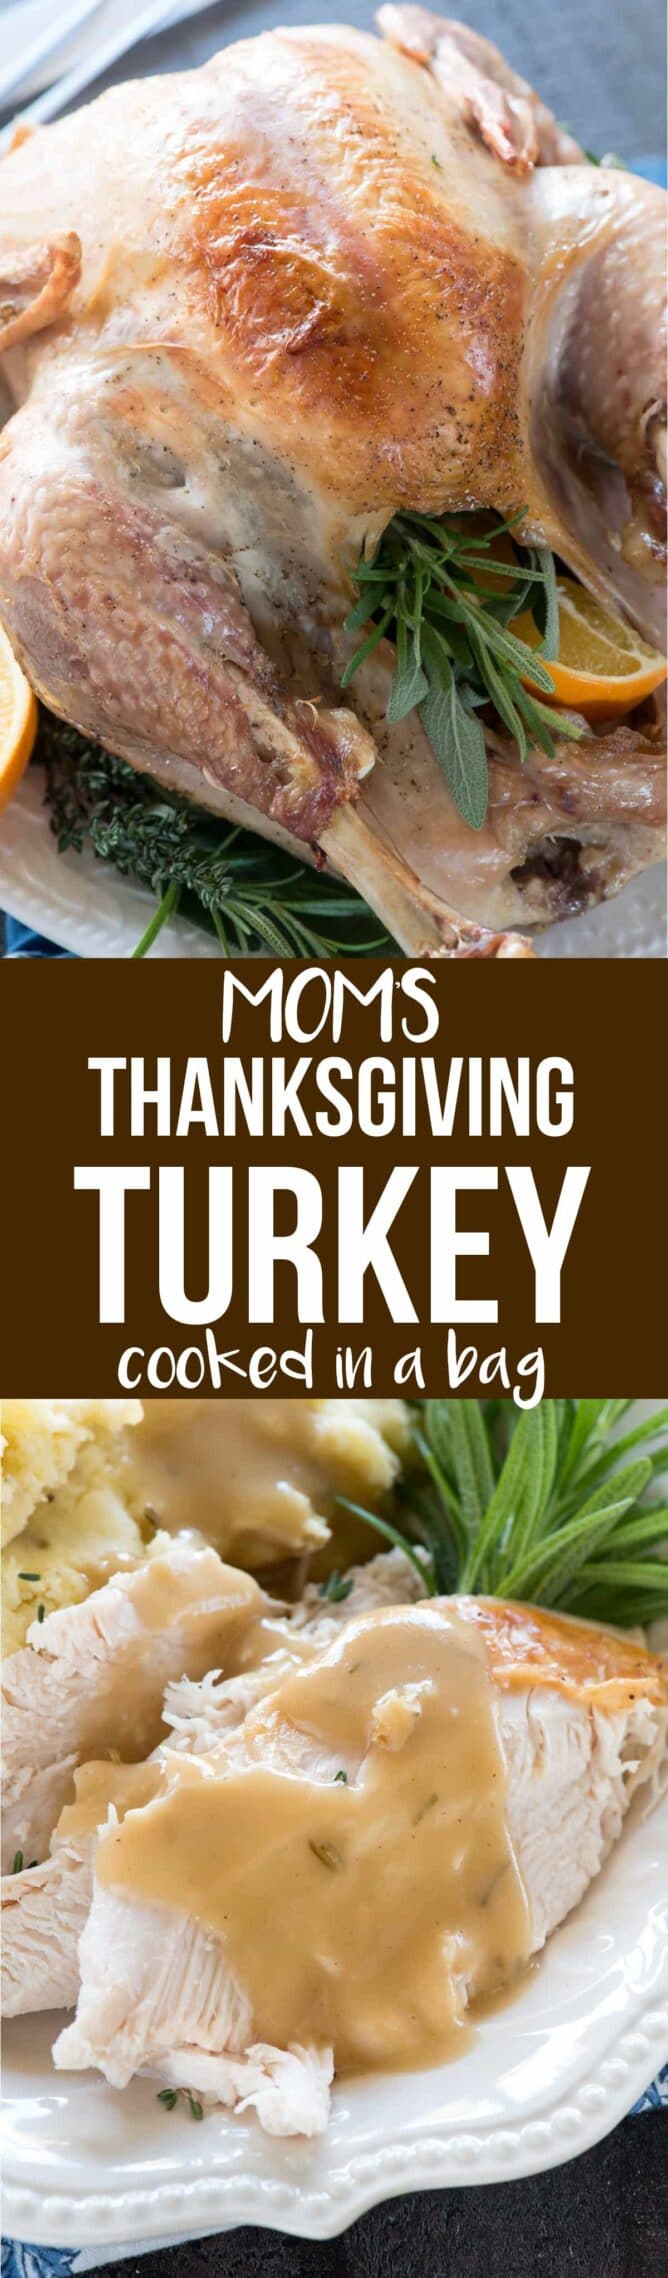 This is my Mom's Thanksgiving Turkey Recipe and it's cooked in an oven bag! It's moist every time with delicious flavor thanks to her secret baste recipe.